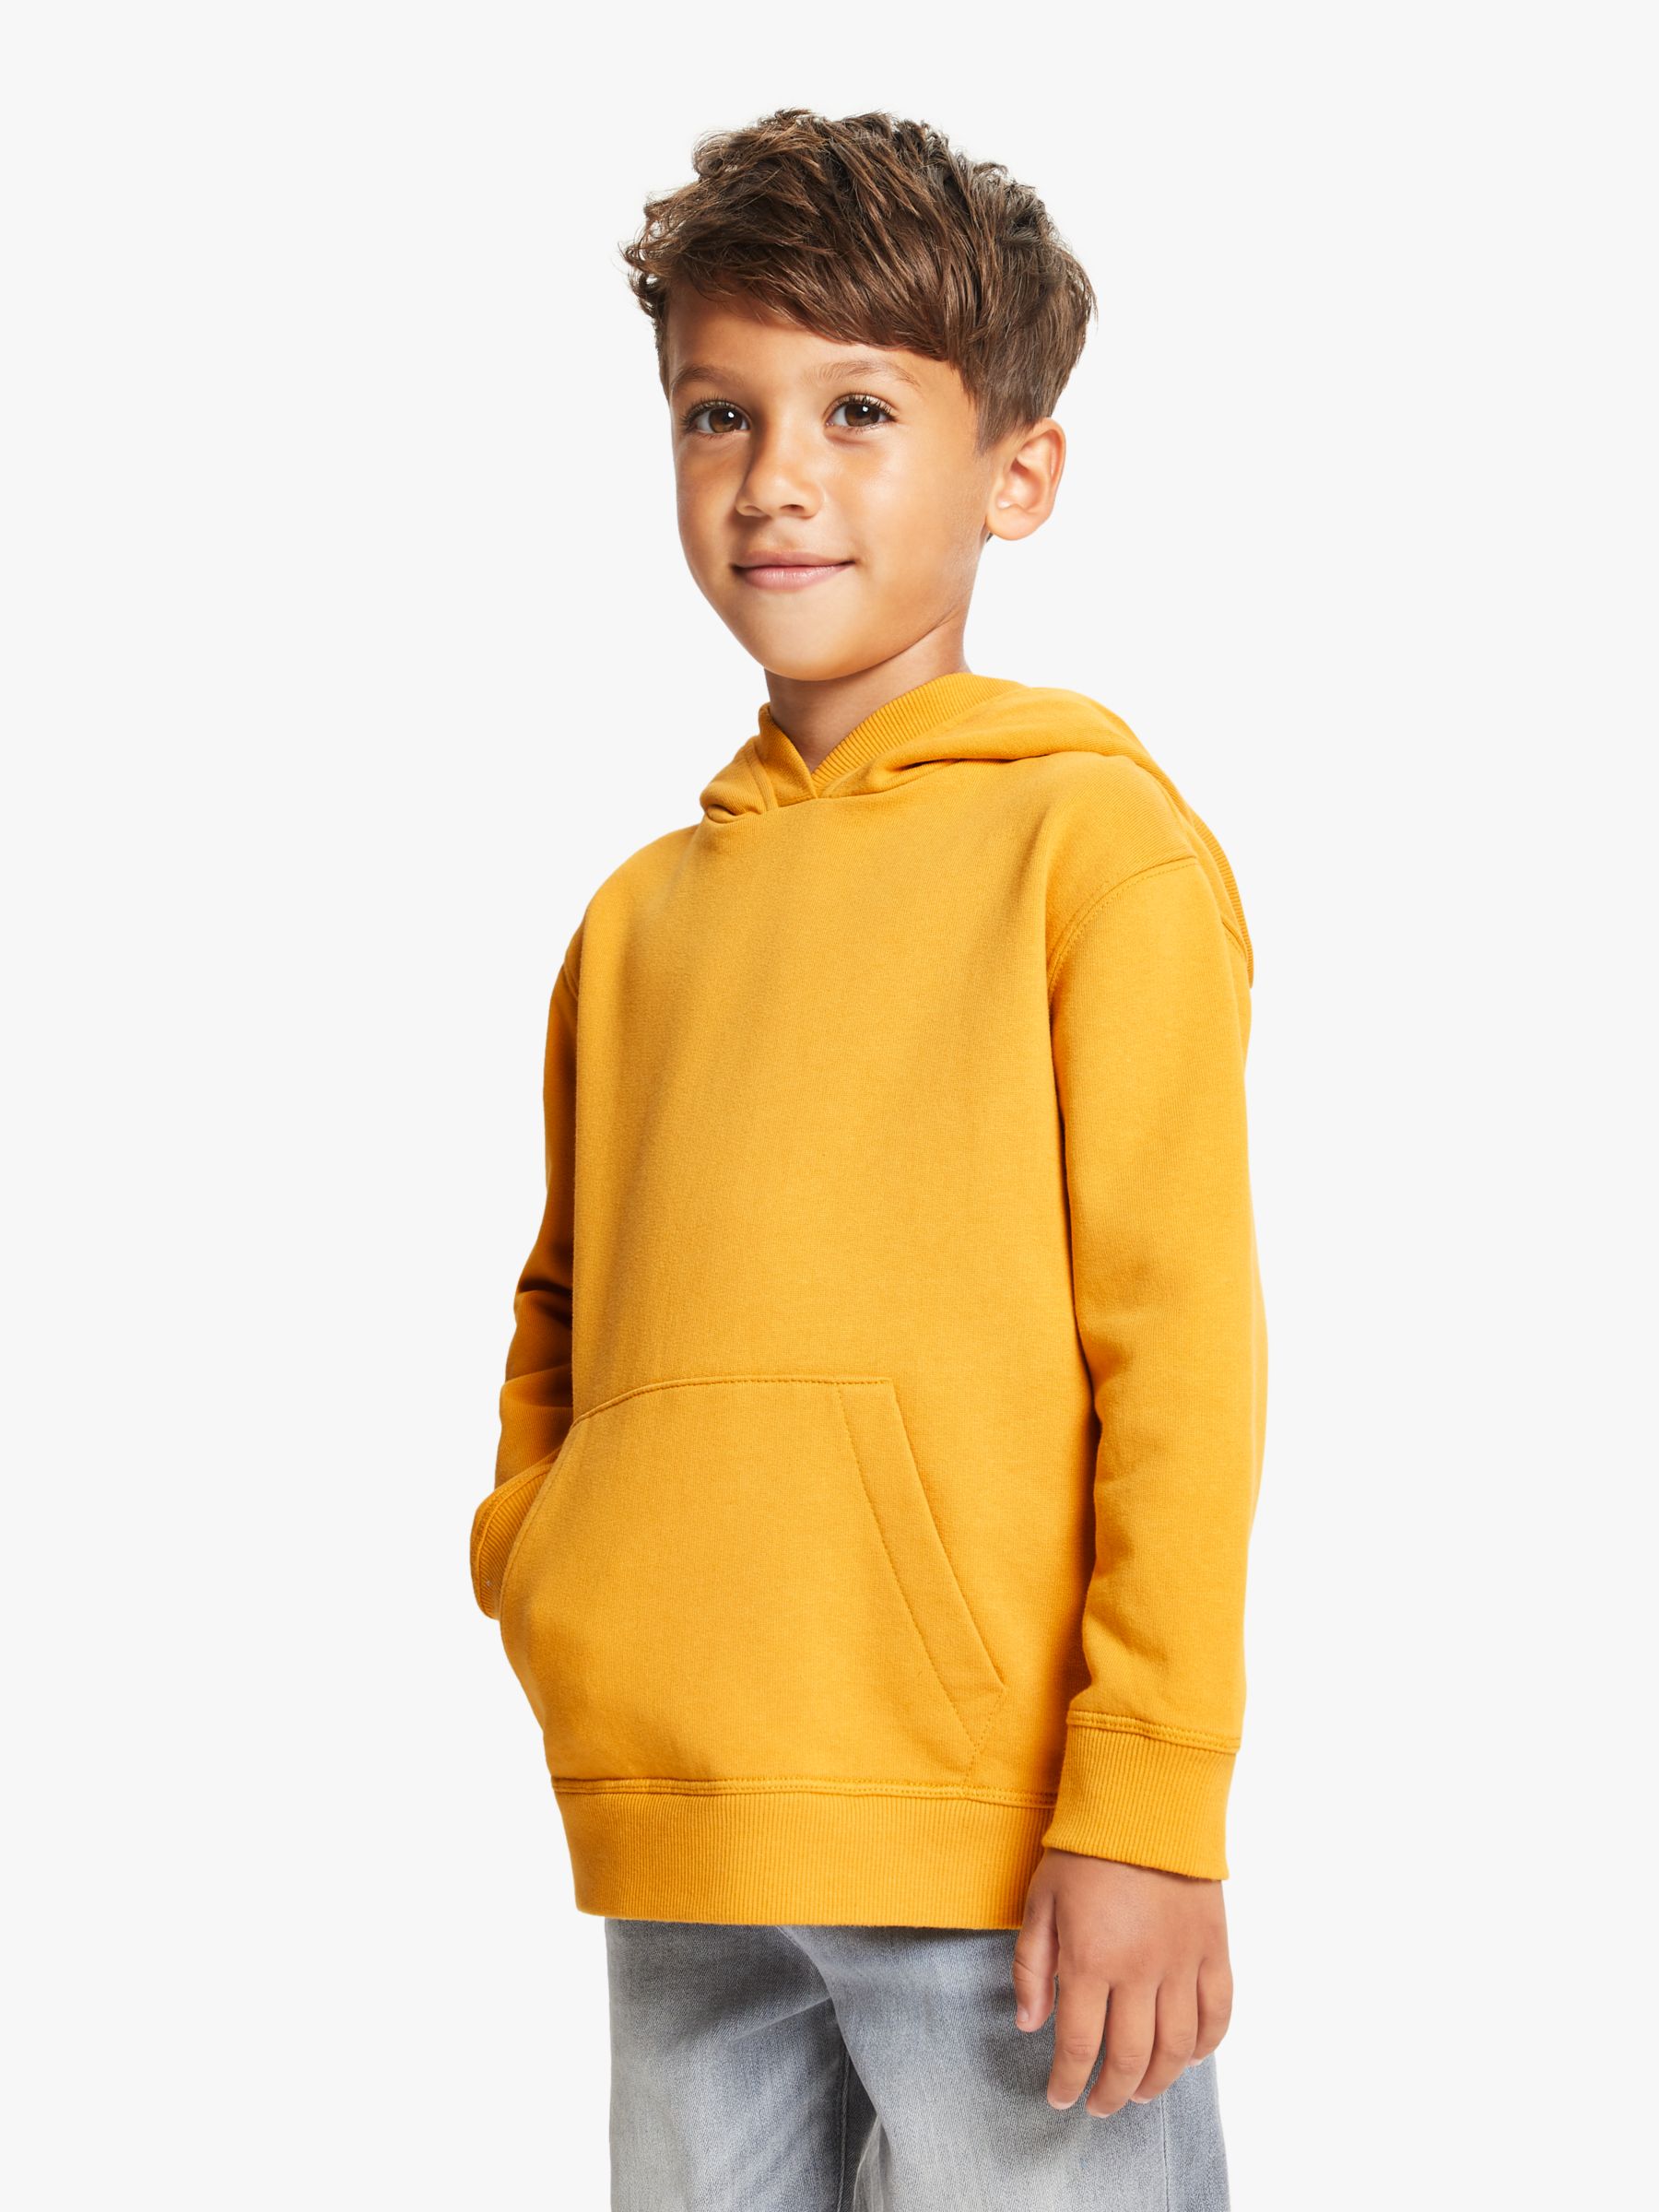 Image of John Lewis and Partners Childrens Pull On Hoodie